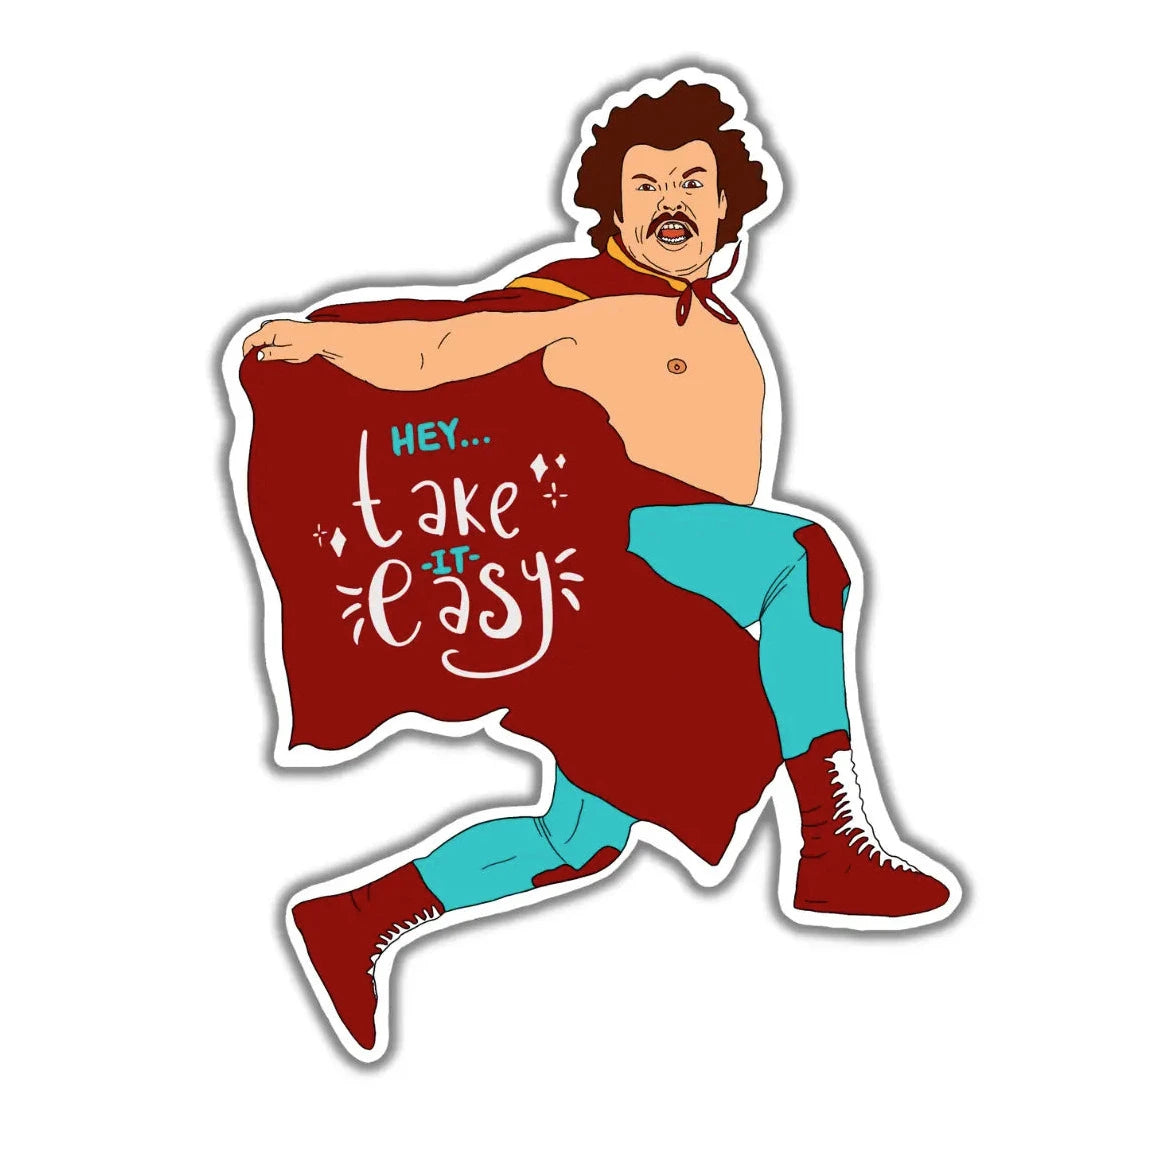 image of Nacho Libre in a jumping position earing a maroon and teal wrestling outfit featuring the phrase Hey Take It Easy on the cap.